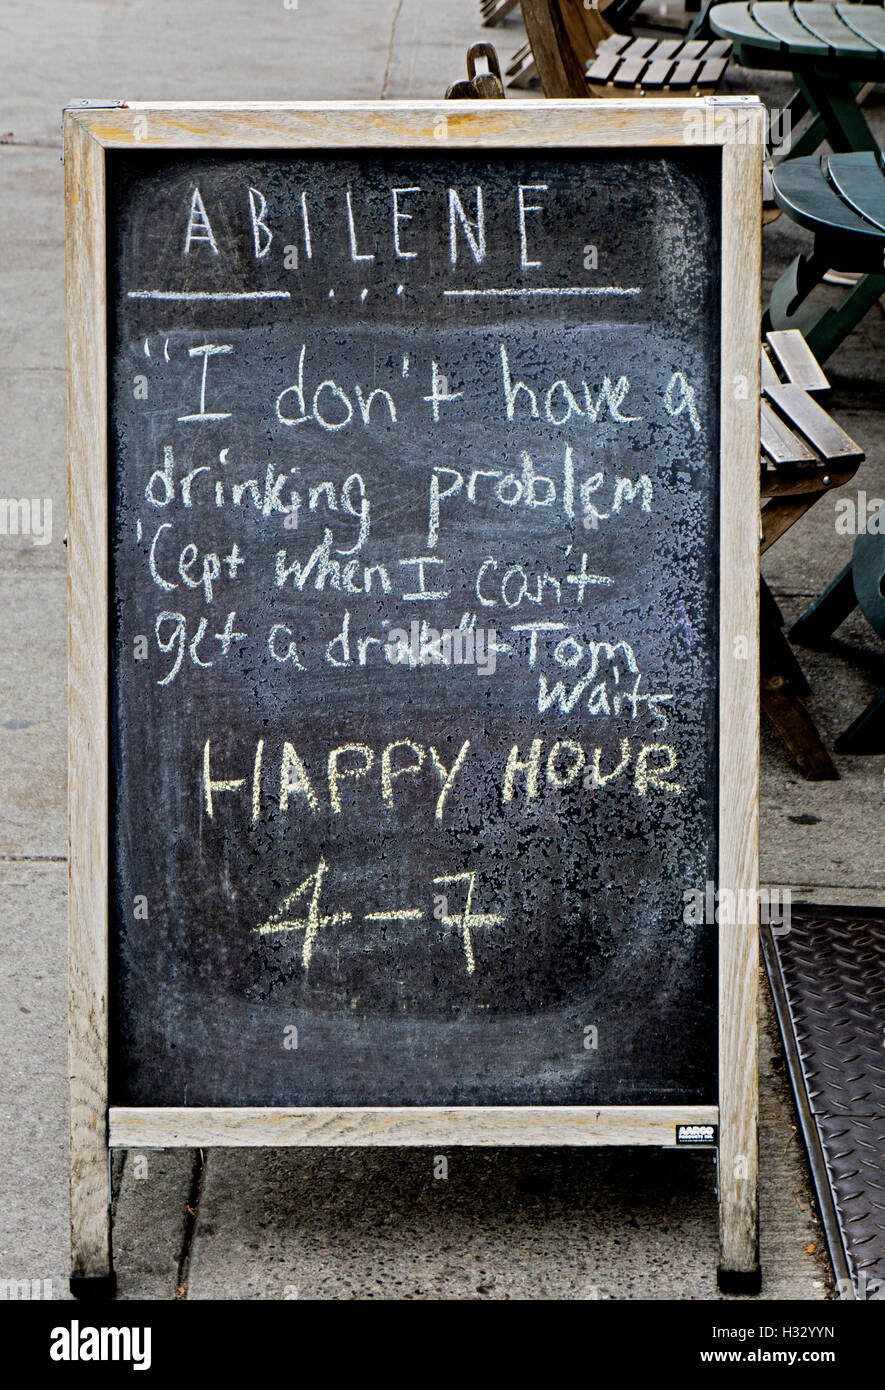 A sign outside the Abilene Bar in Cobble Hill, Brooklyn, New York with a Tom Waits quote about his affection for drinking. Stock Photo